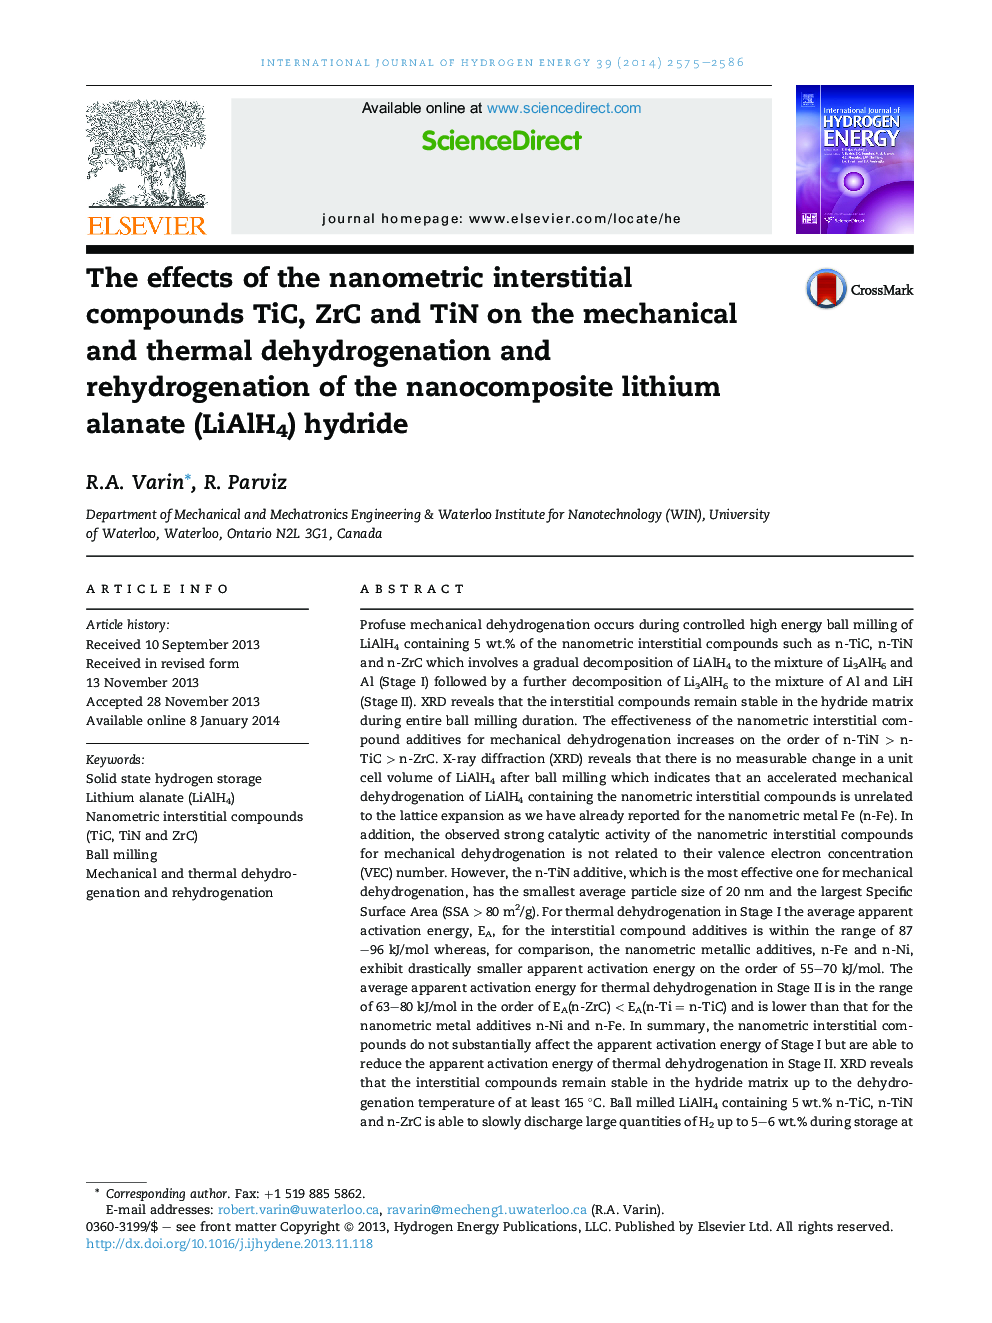 The effects of the nanometric interstitial compounds TiC, ZrC and TiN on the mechanical and thermal dehydrogenation and rehydrogenation of the nanocomposite lithium alanate (LiAlH4) hydride